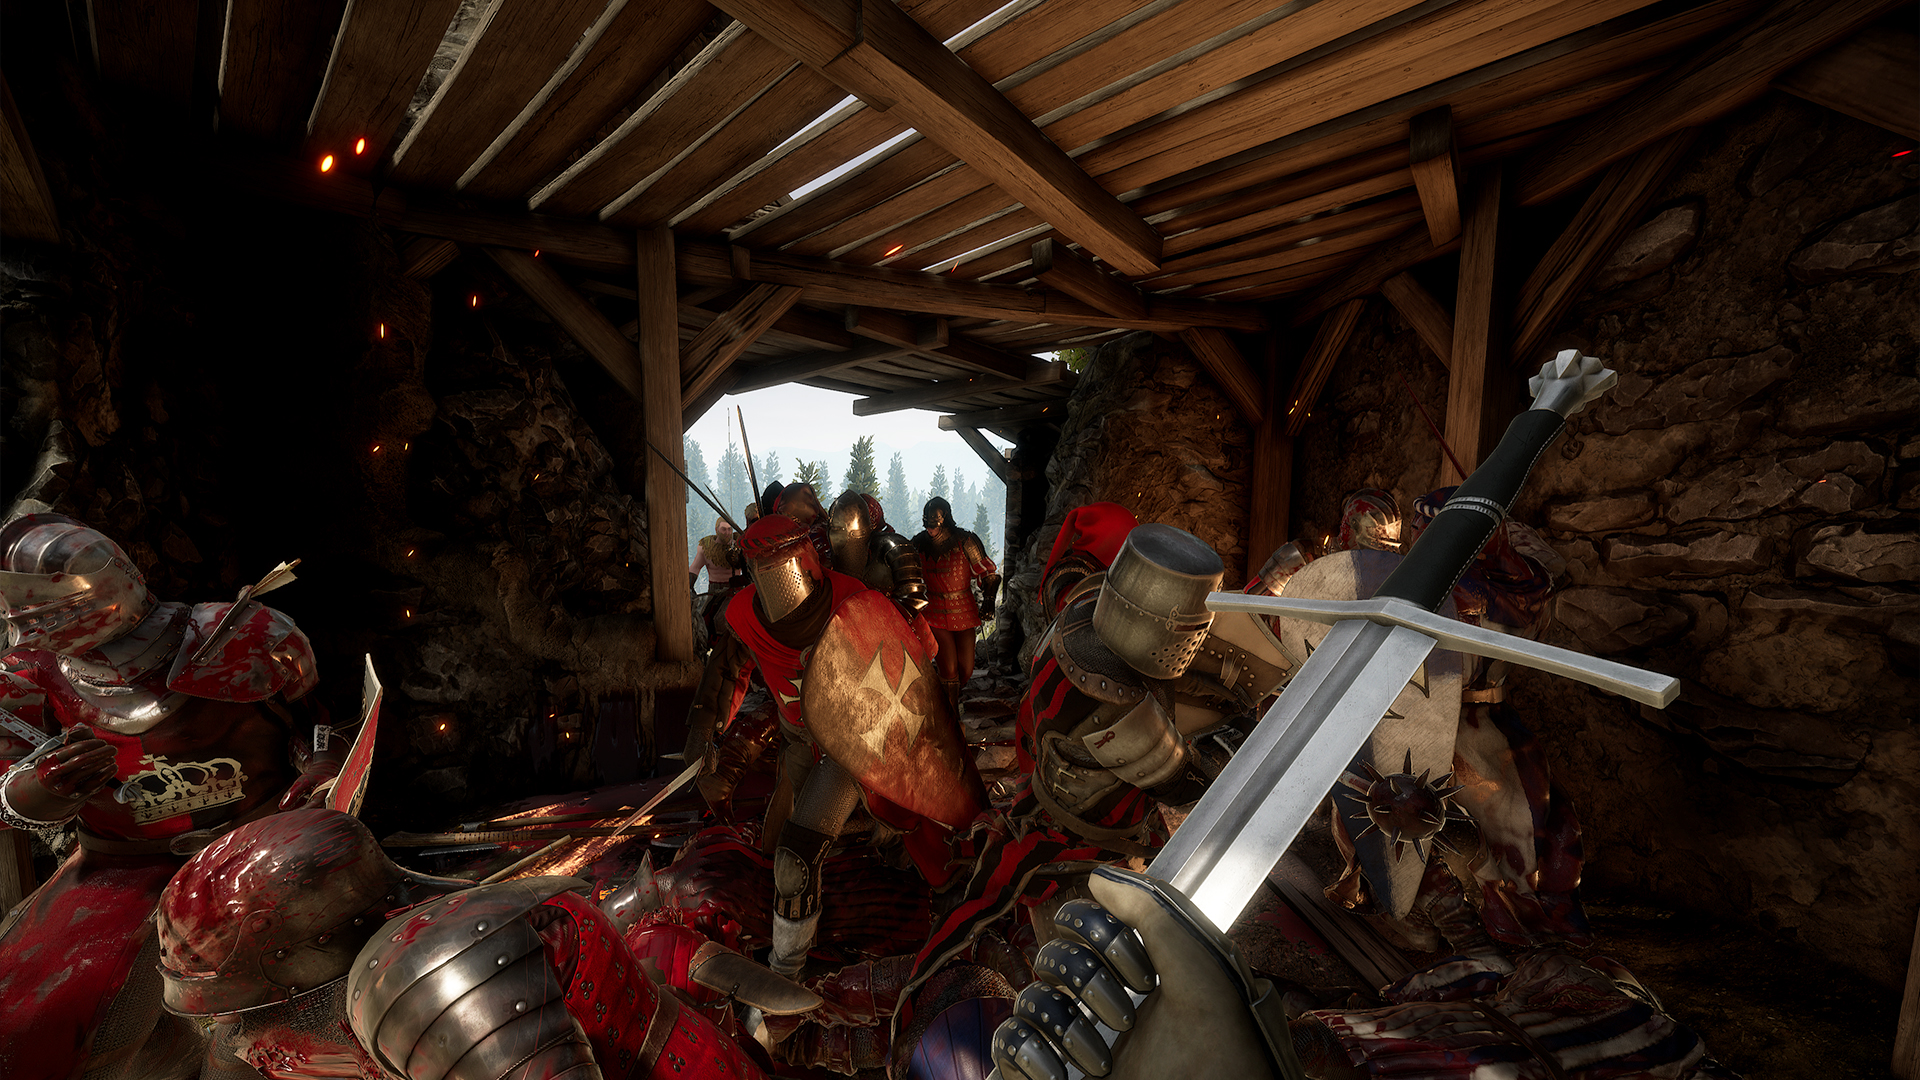 The chaotic first person combat of Mordhau